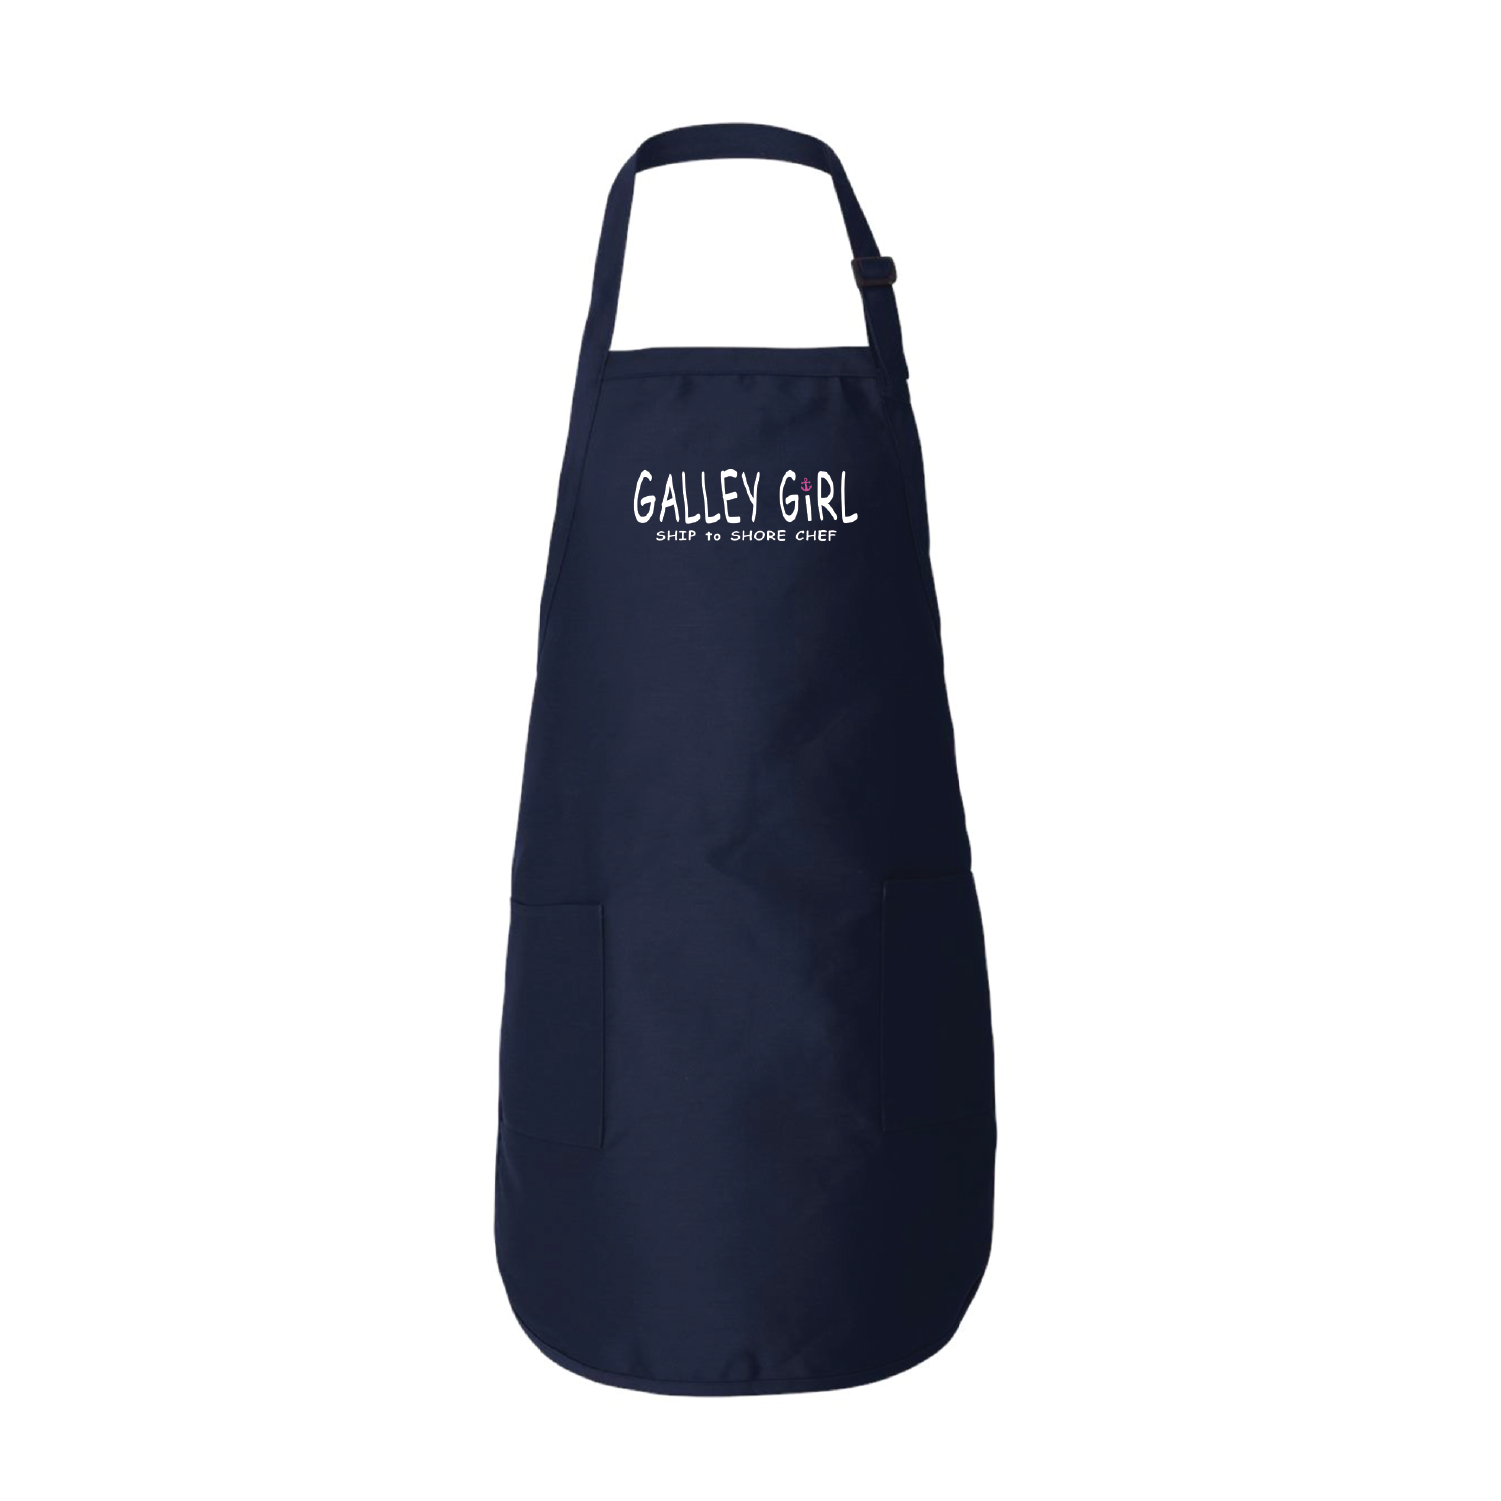 Galley Girl Apron